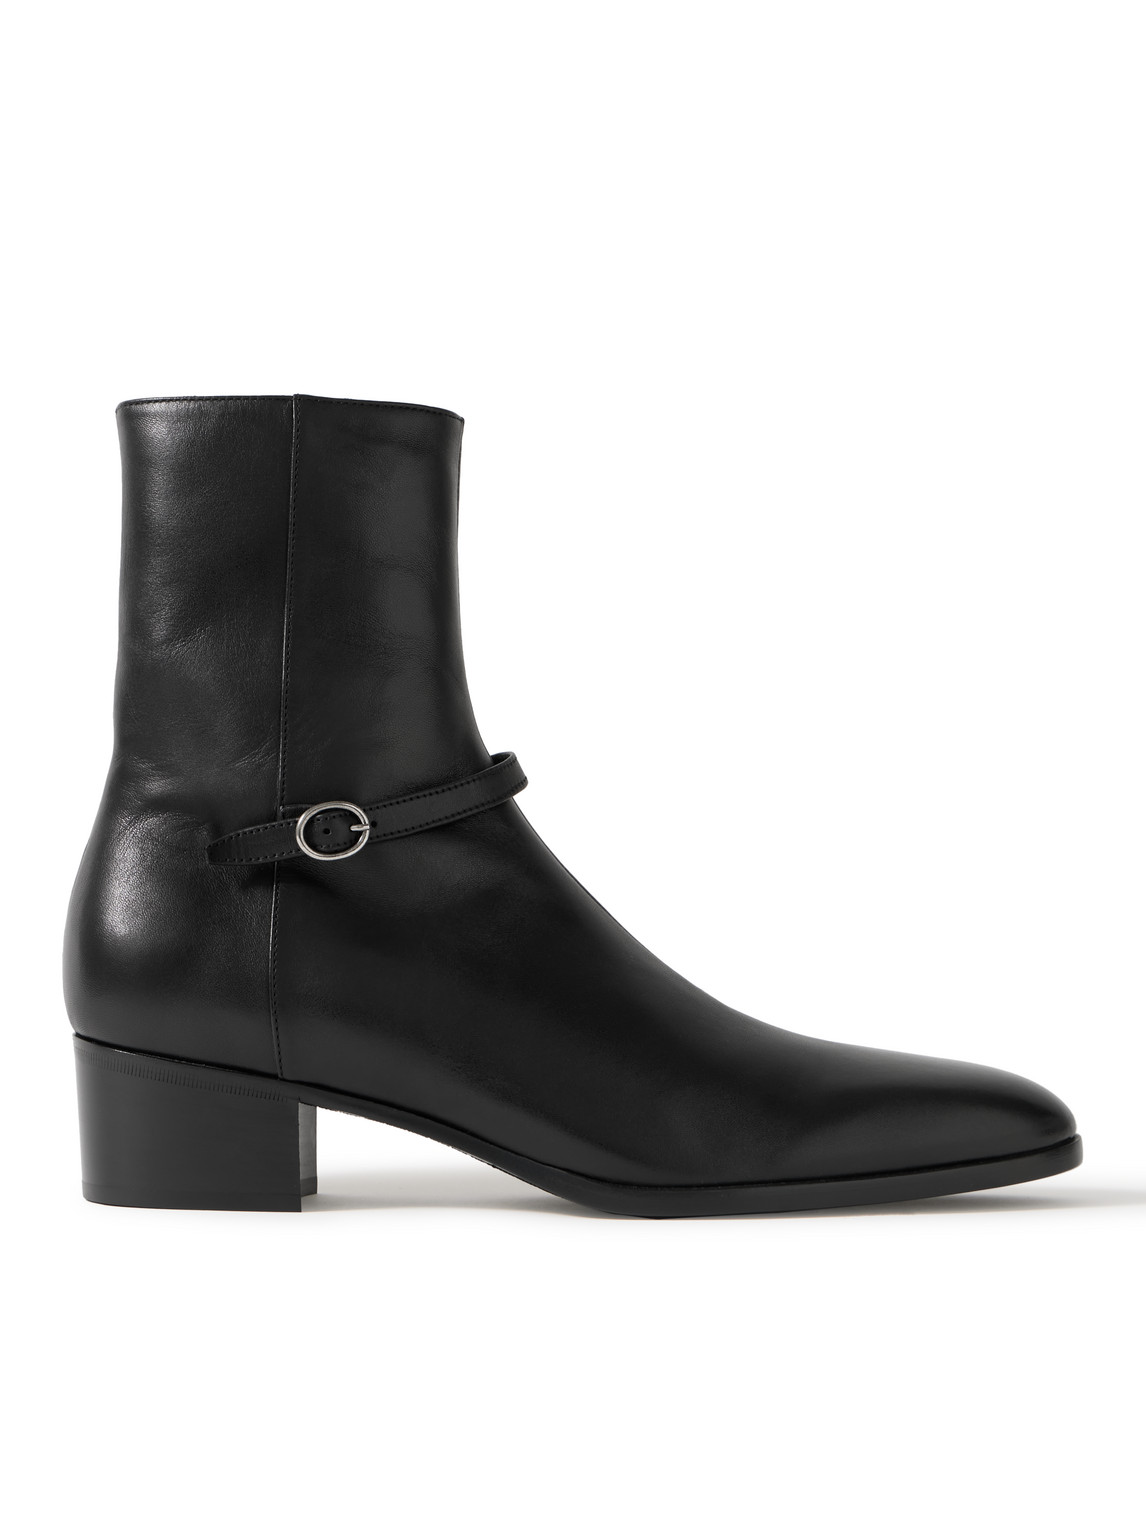 Saint Laurent Vlad 45 Zipped Leather Boots In 블랙